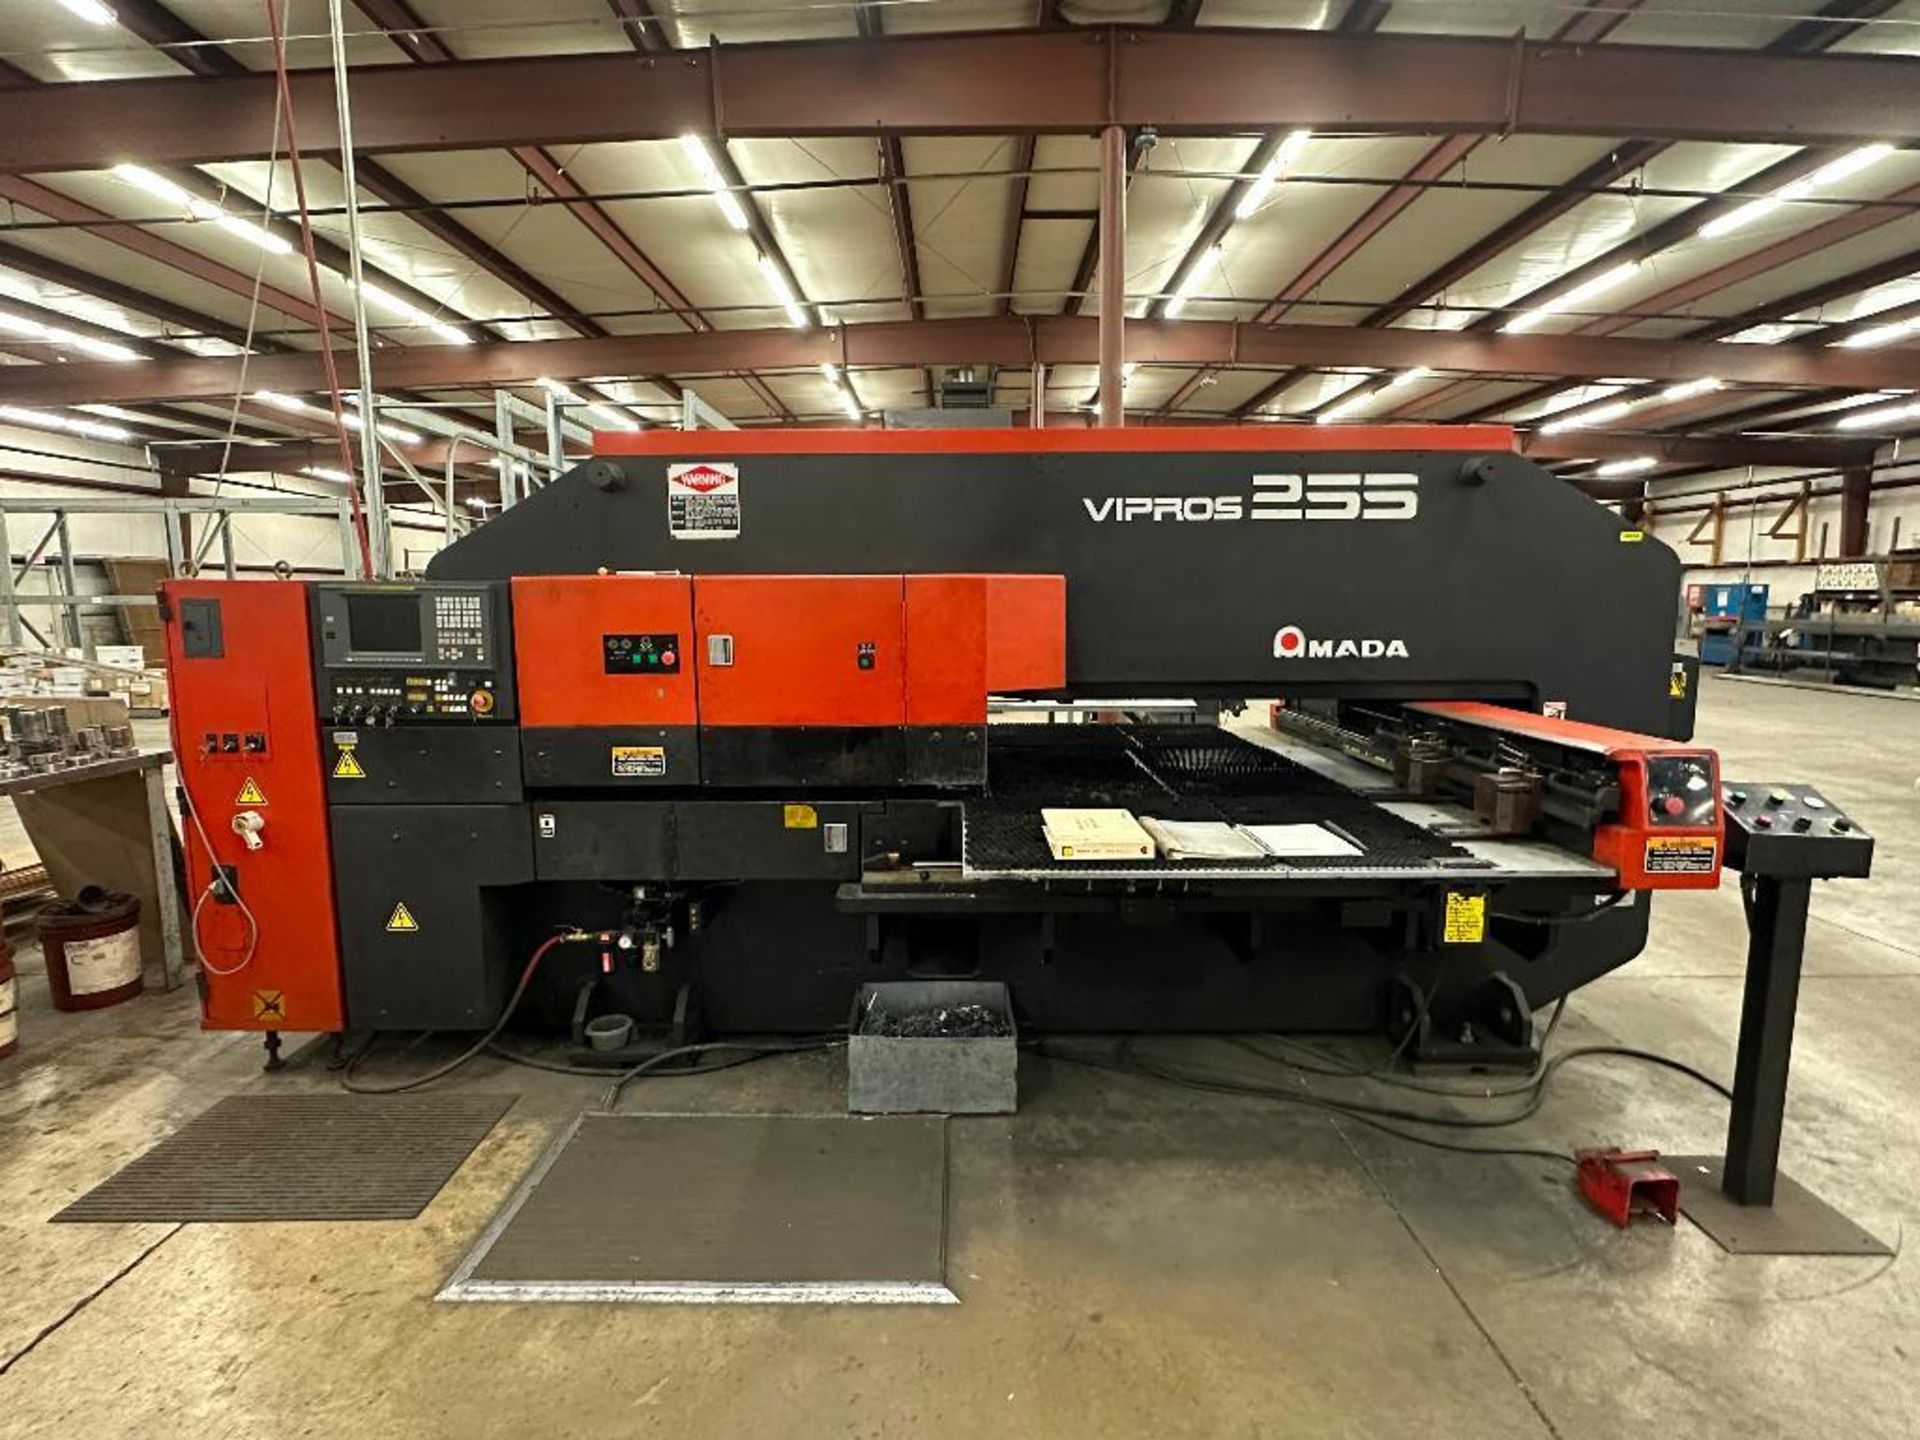 Amada Vipros 255 CNC Turret 20 Ton Press WITH SBC CHILLER AND FULL WORK TABLE OF PARTS AND ACCESSORI